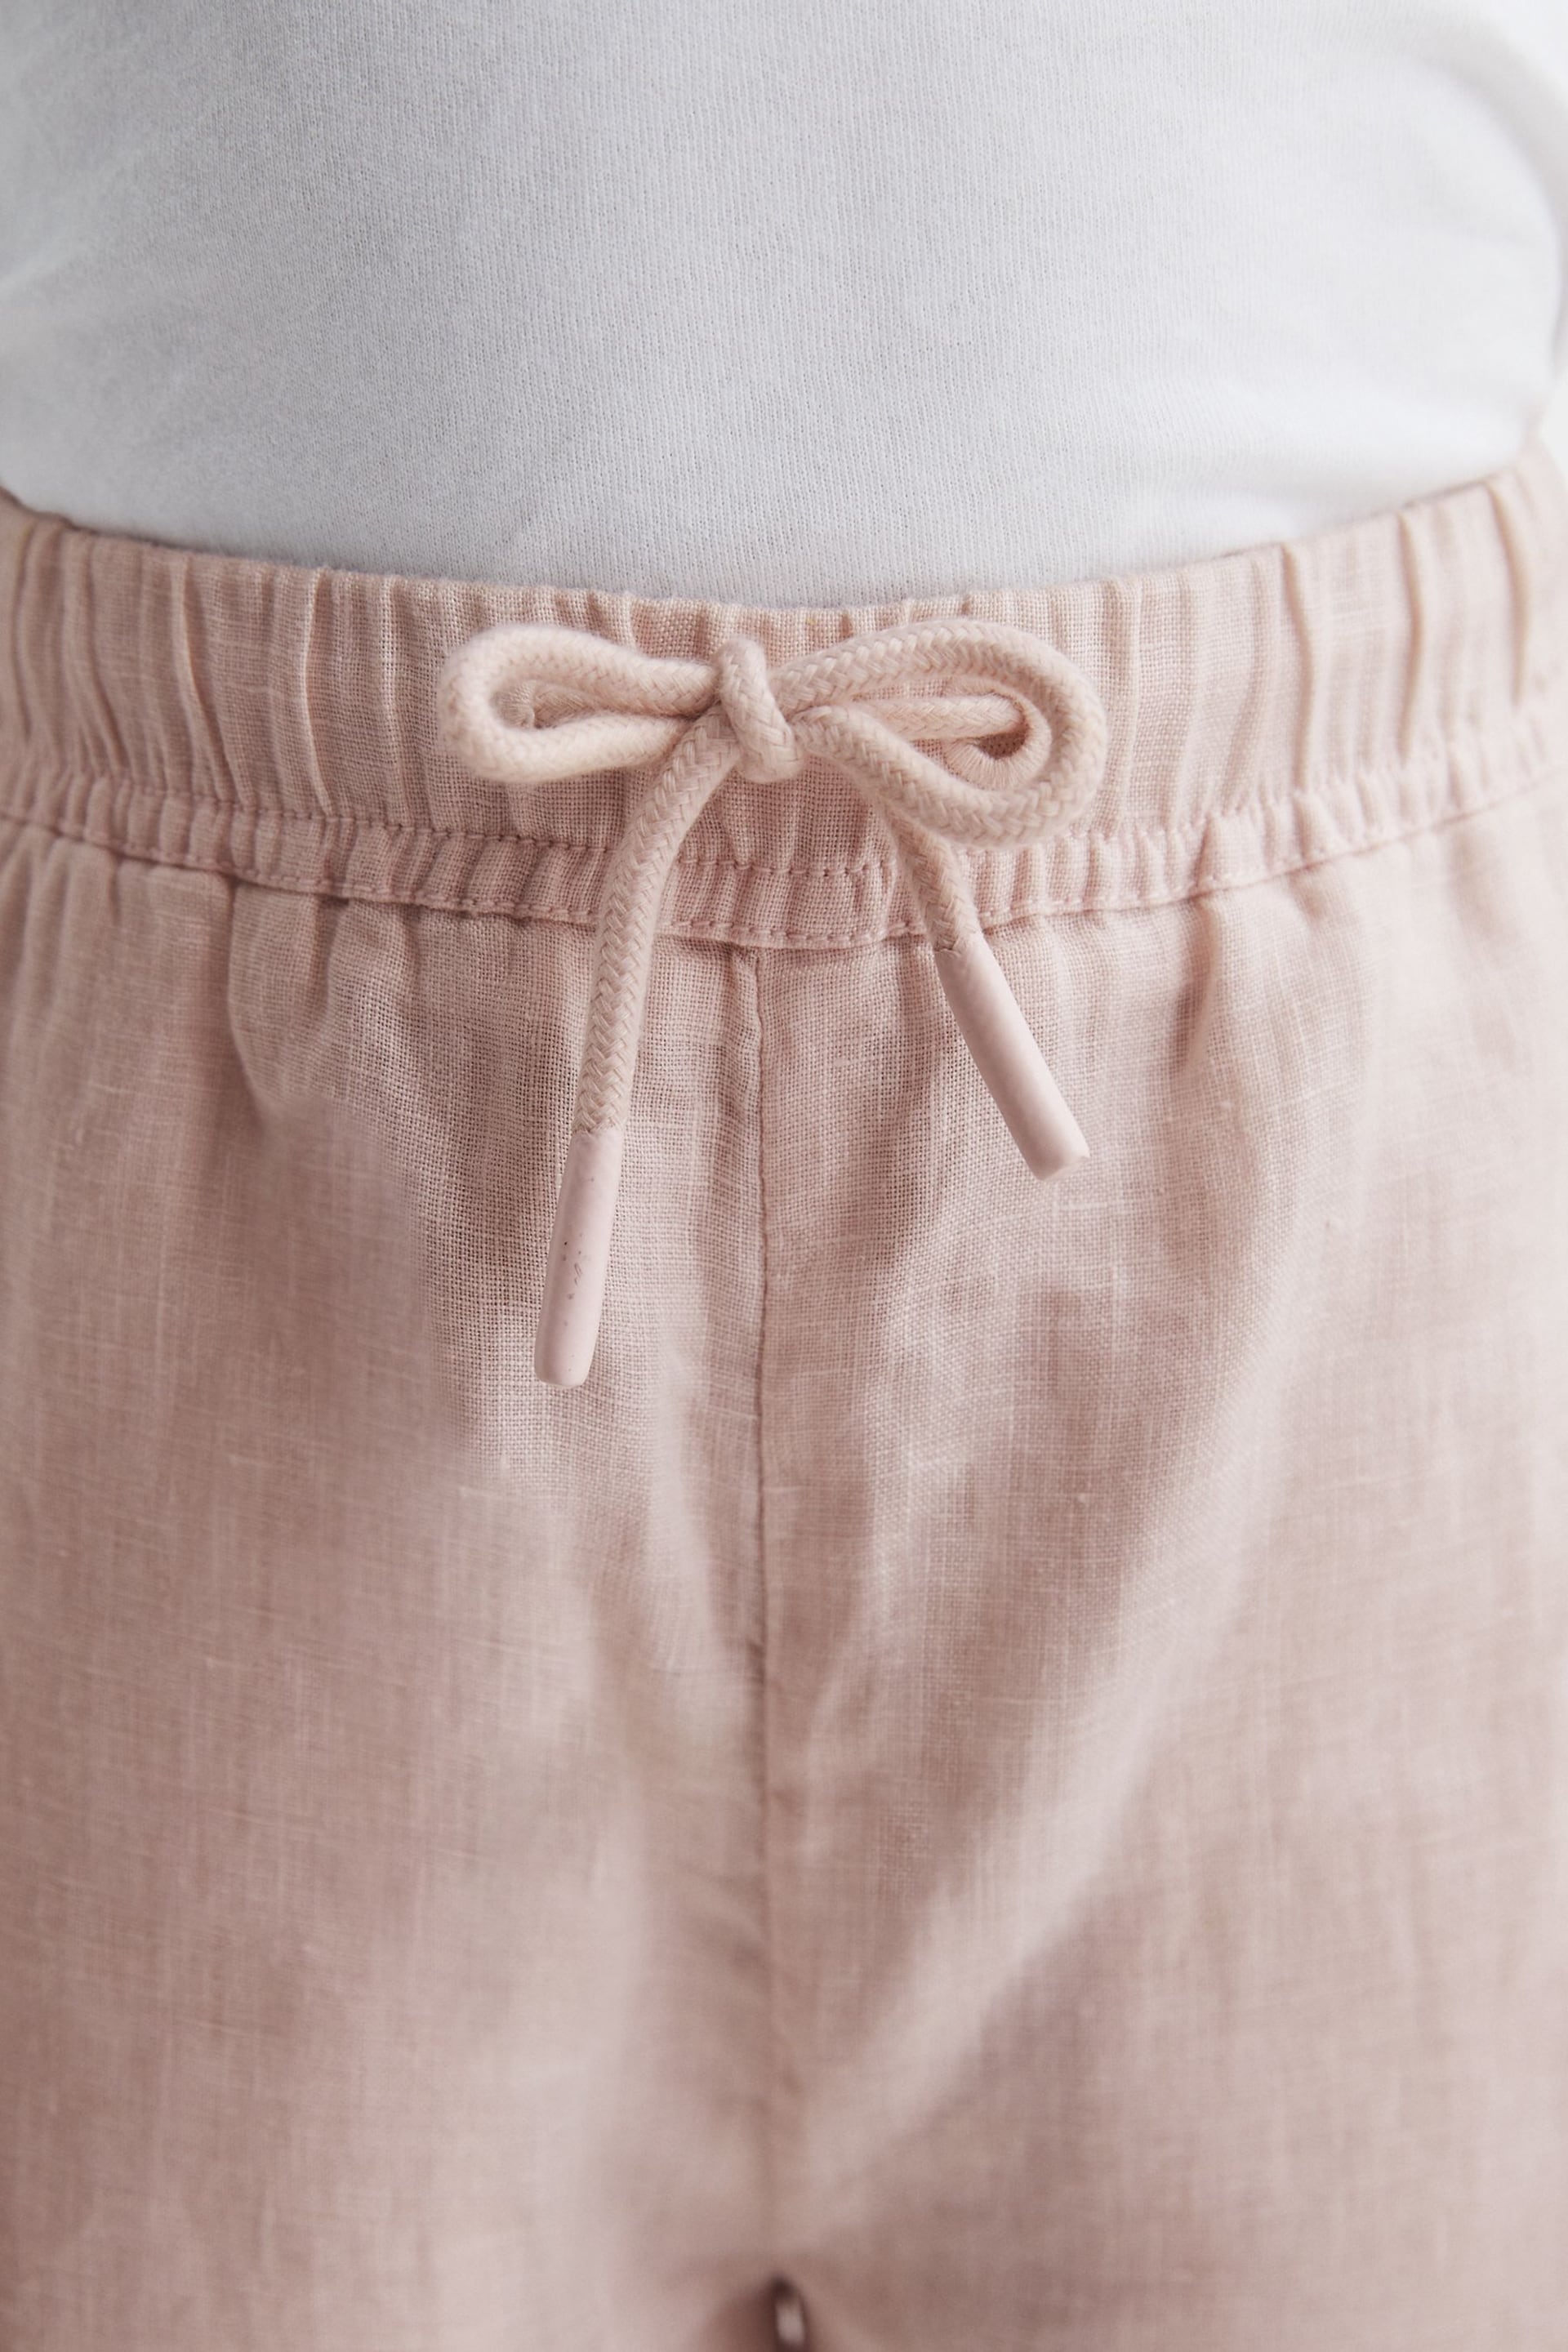 Reiss Soft Pink Cleo Junior Linen Drawstring Trousers - Image 4 of 6